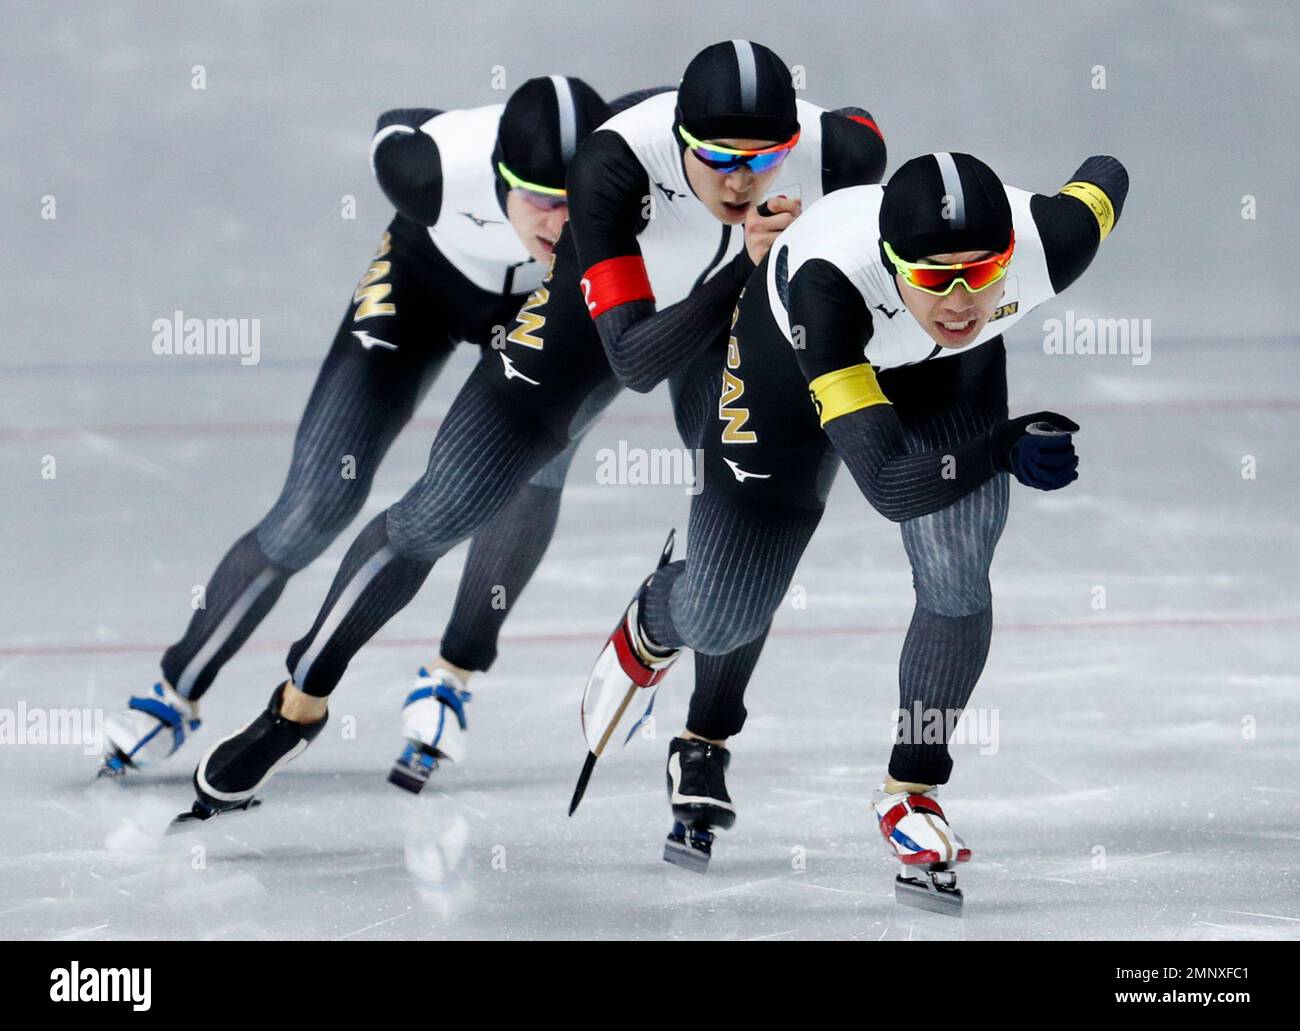 Team Japan with Shane Williamson, rear, Shota Nakamura, center, and Seitaro  Ichinohe, front, competes during the quarterfinals of the men's team  pursuit speedskating race at the Gangneung Oval at the 2018 Winter